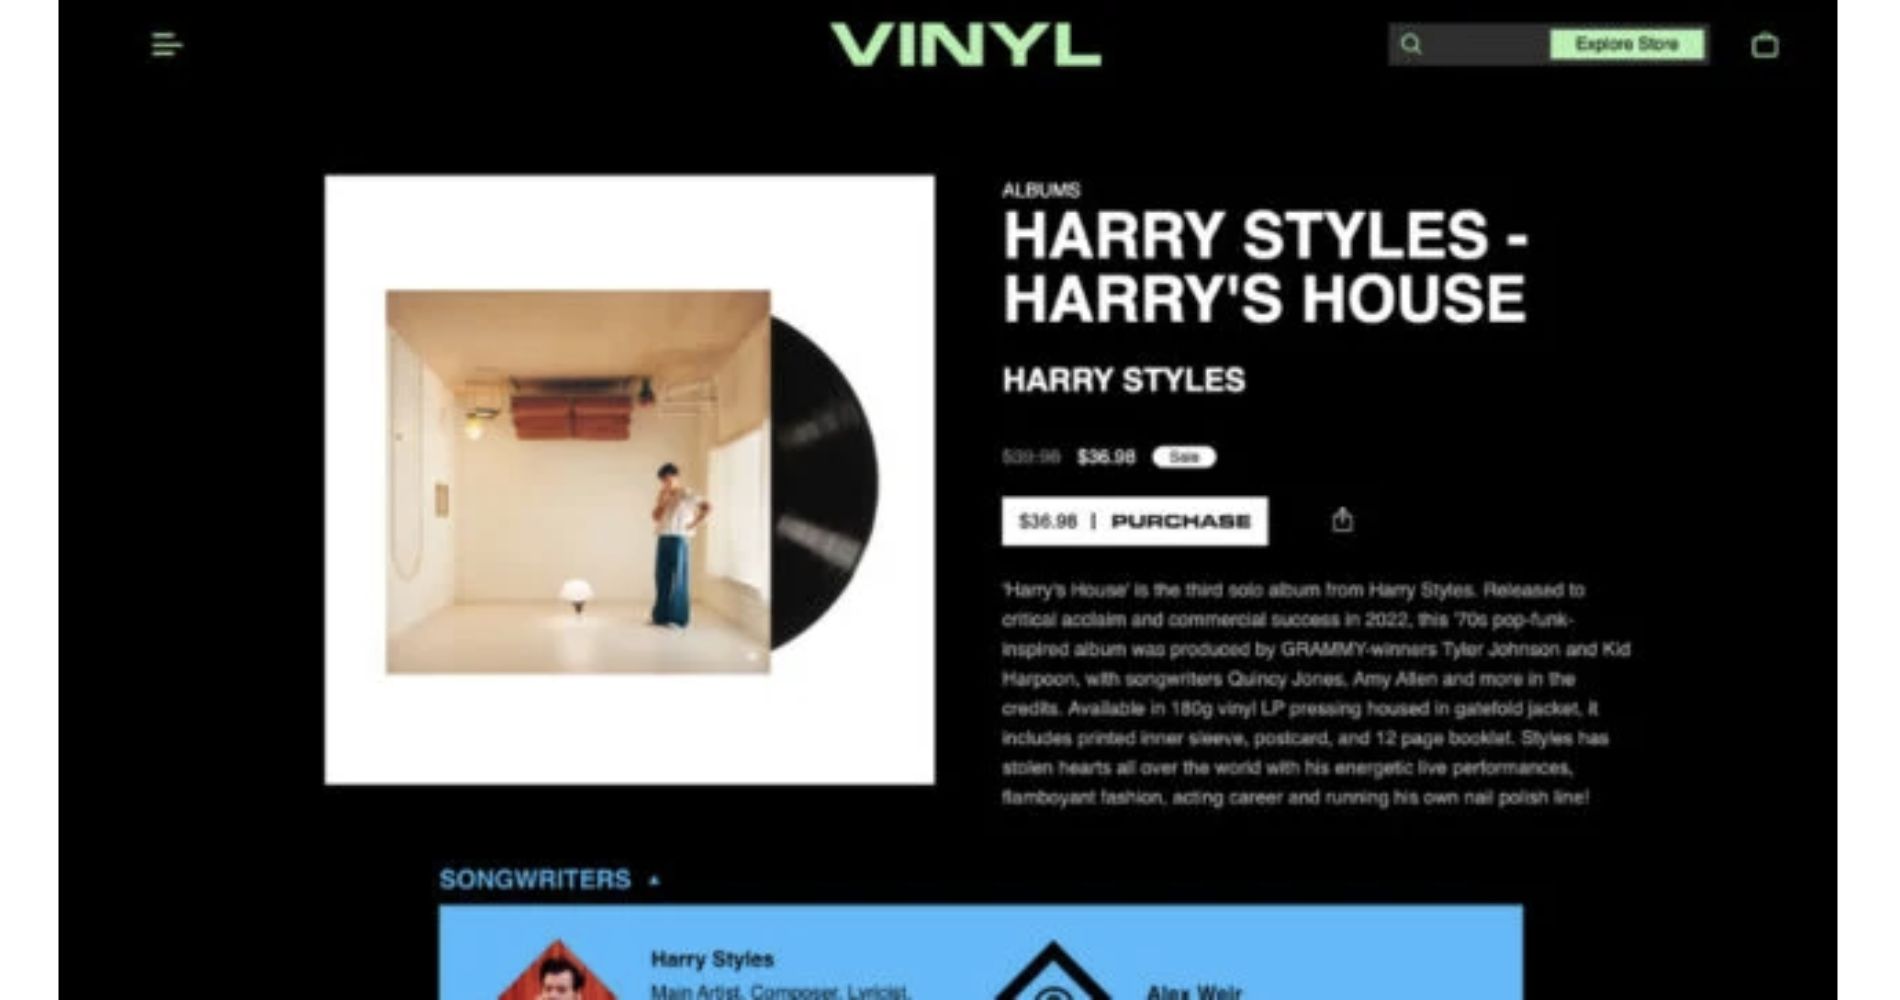 Jaxsta Expands It's Services With The Launch of Vinyl.com, A Digital Hub For Music Credits And Vinyl Collectors